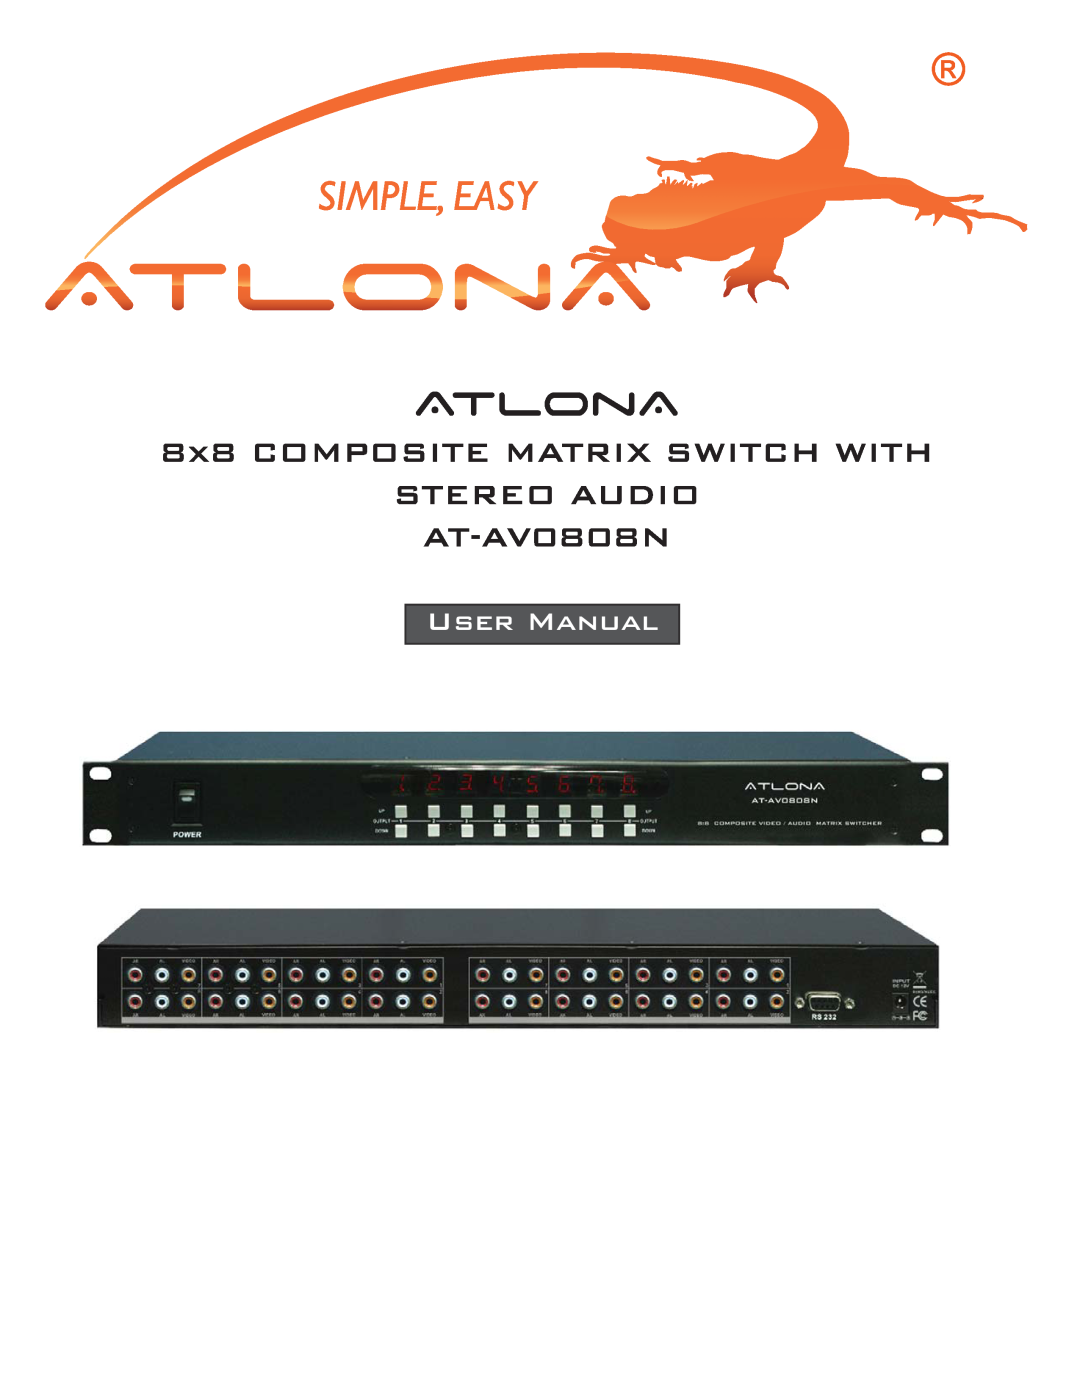 Atlona user manual AtlonA, 8x8 COMPOSITE MATRIX SWITCH WITH STEREO AUDIO AT-AV0808N, User Manual 